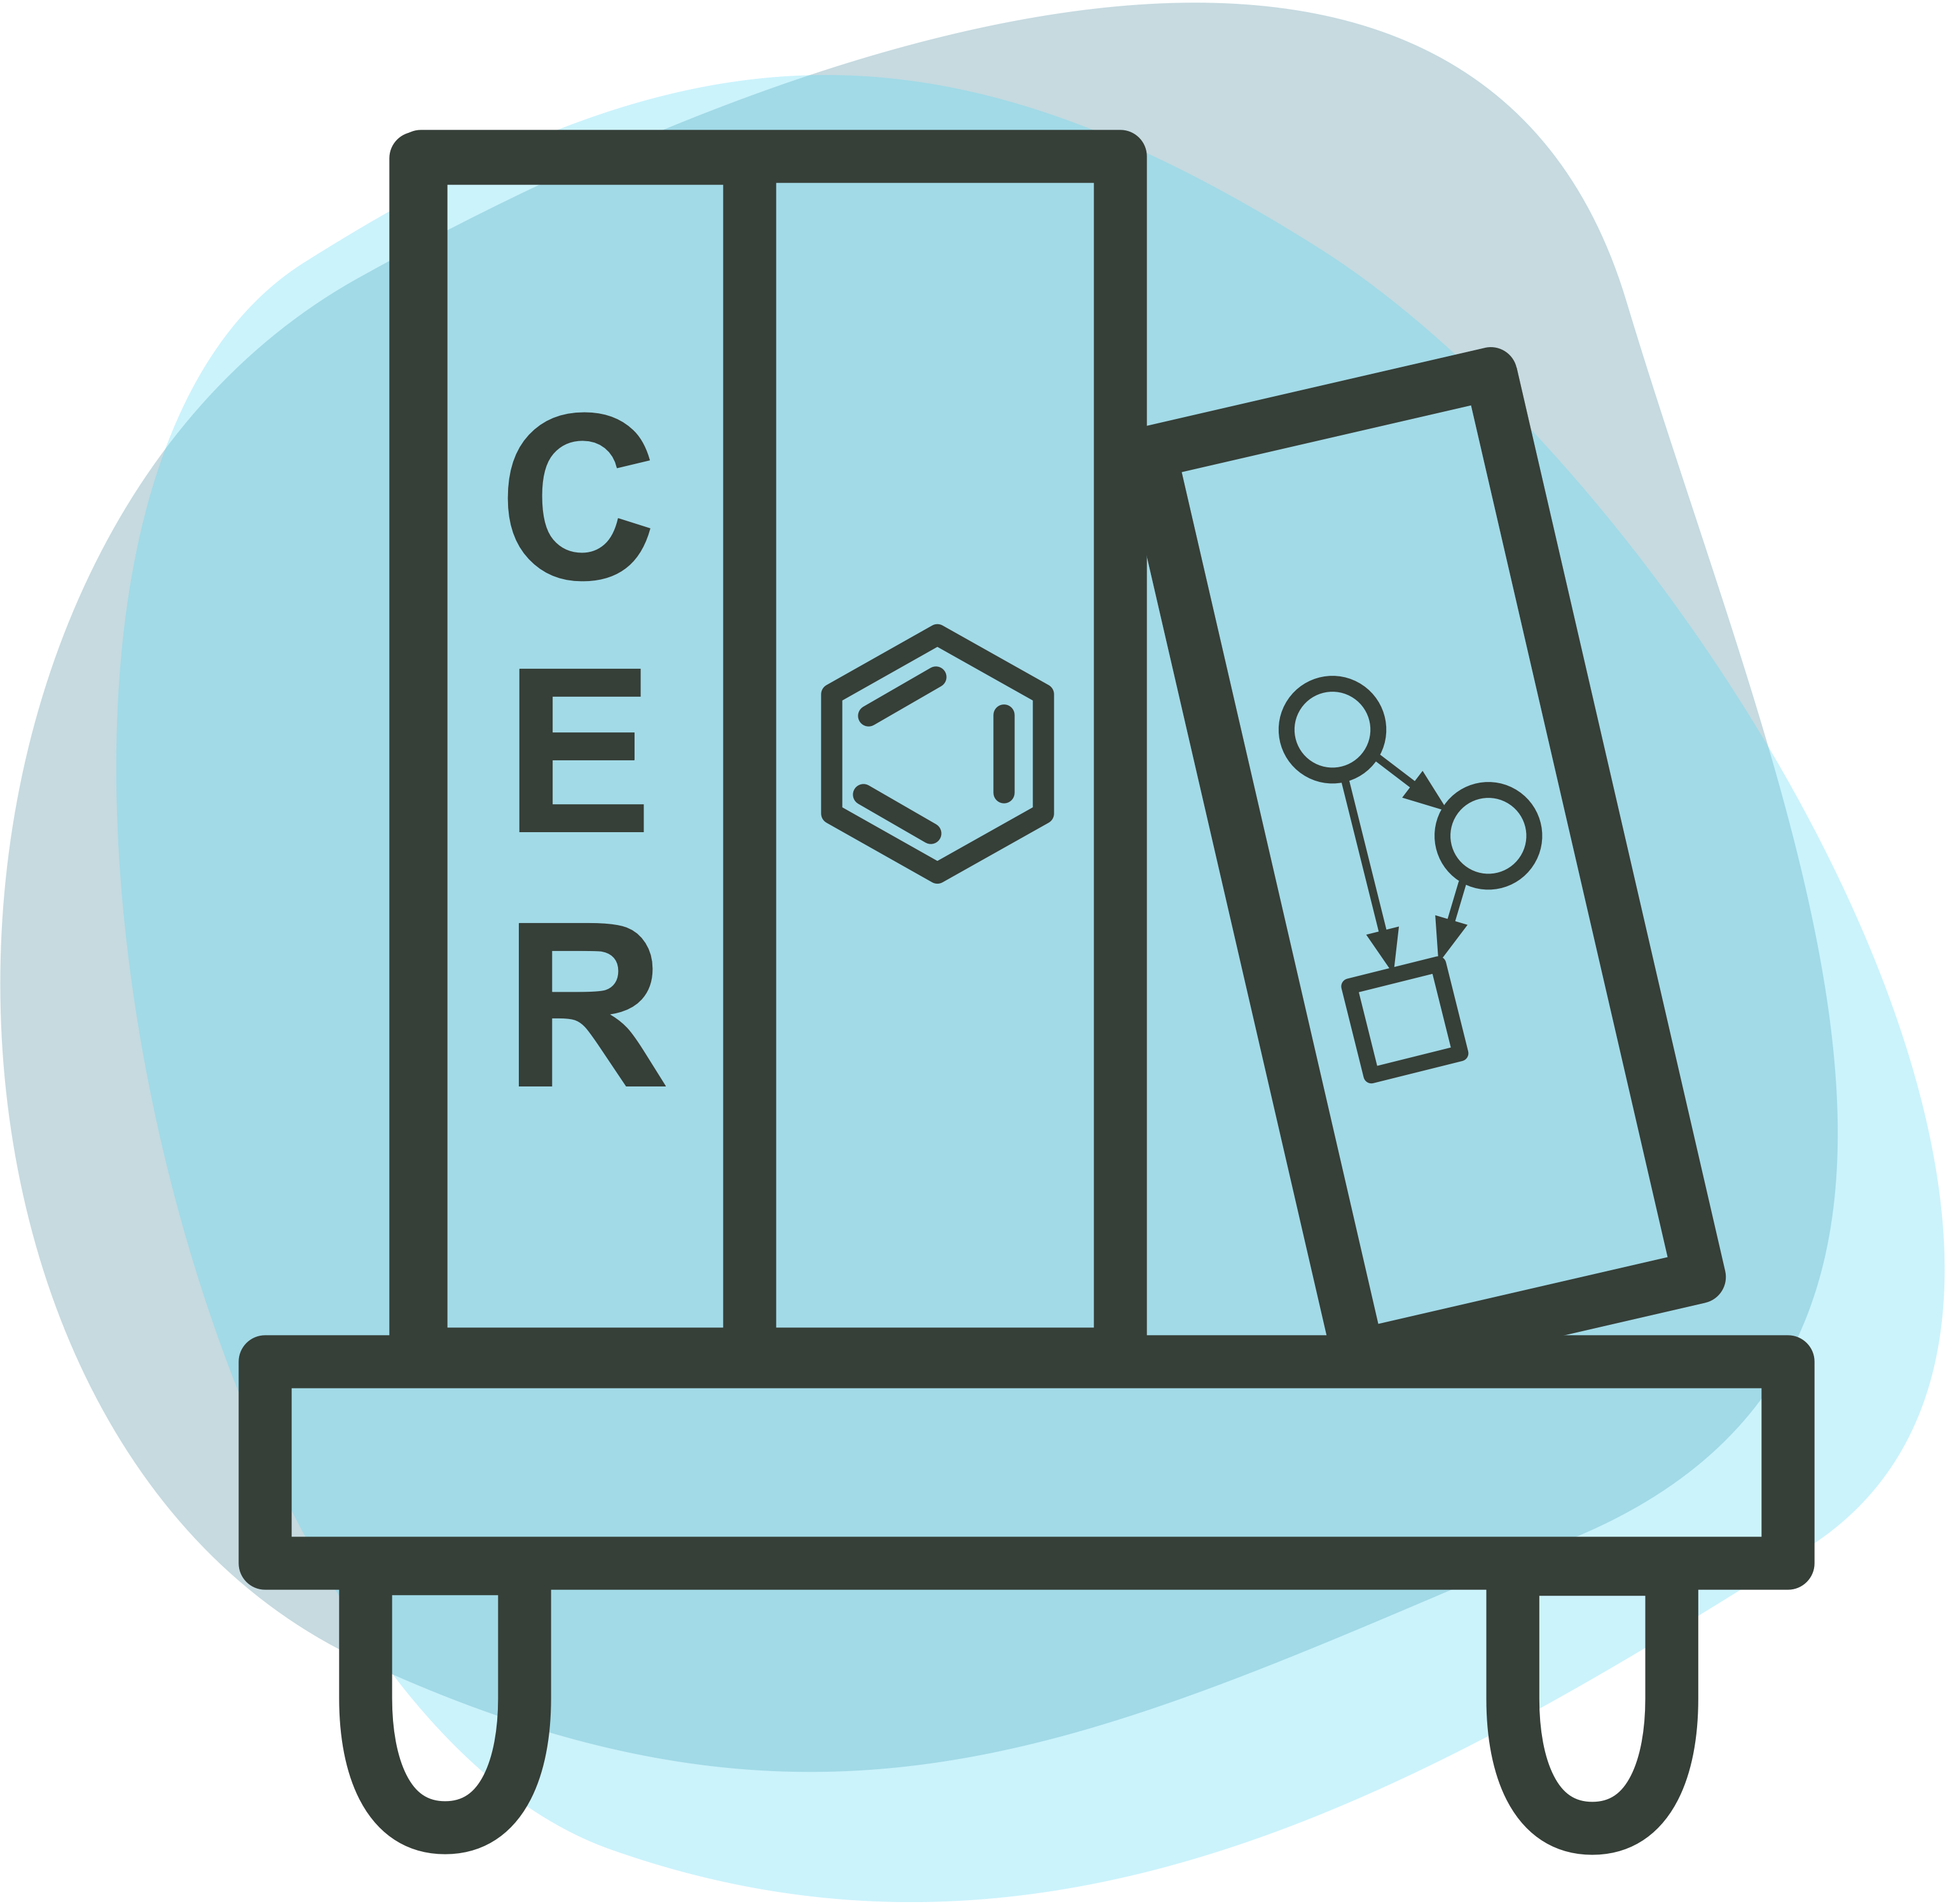 Raker Research Group Logo. Bookshelf with three books. One with the letters C, E, and R for chemical education research. One with the structure of the molecule benzene. And, one with a generic structural equation model.